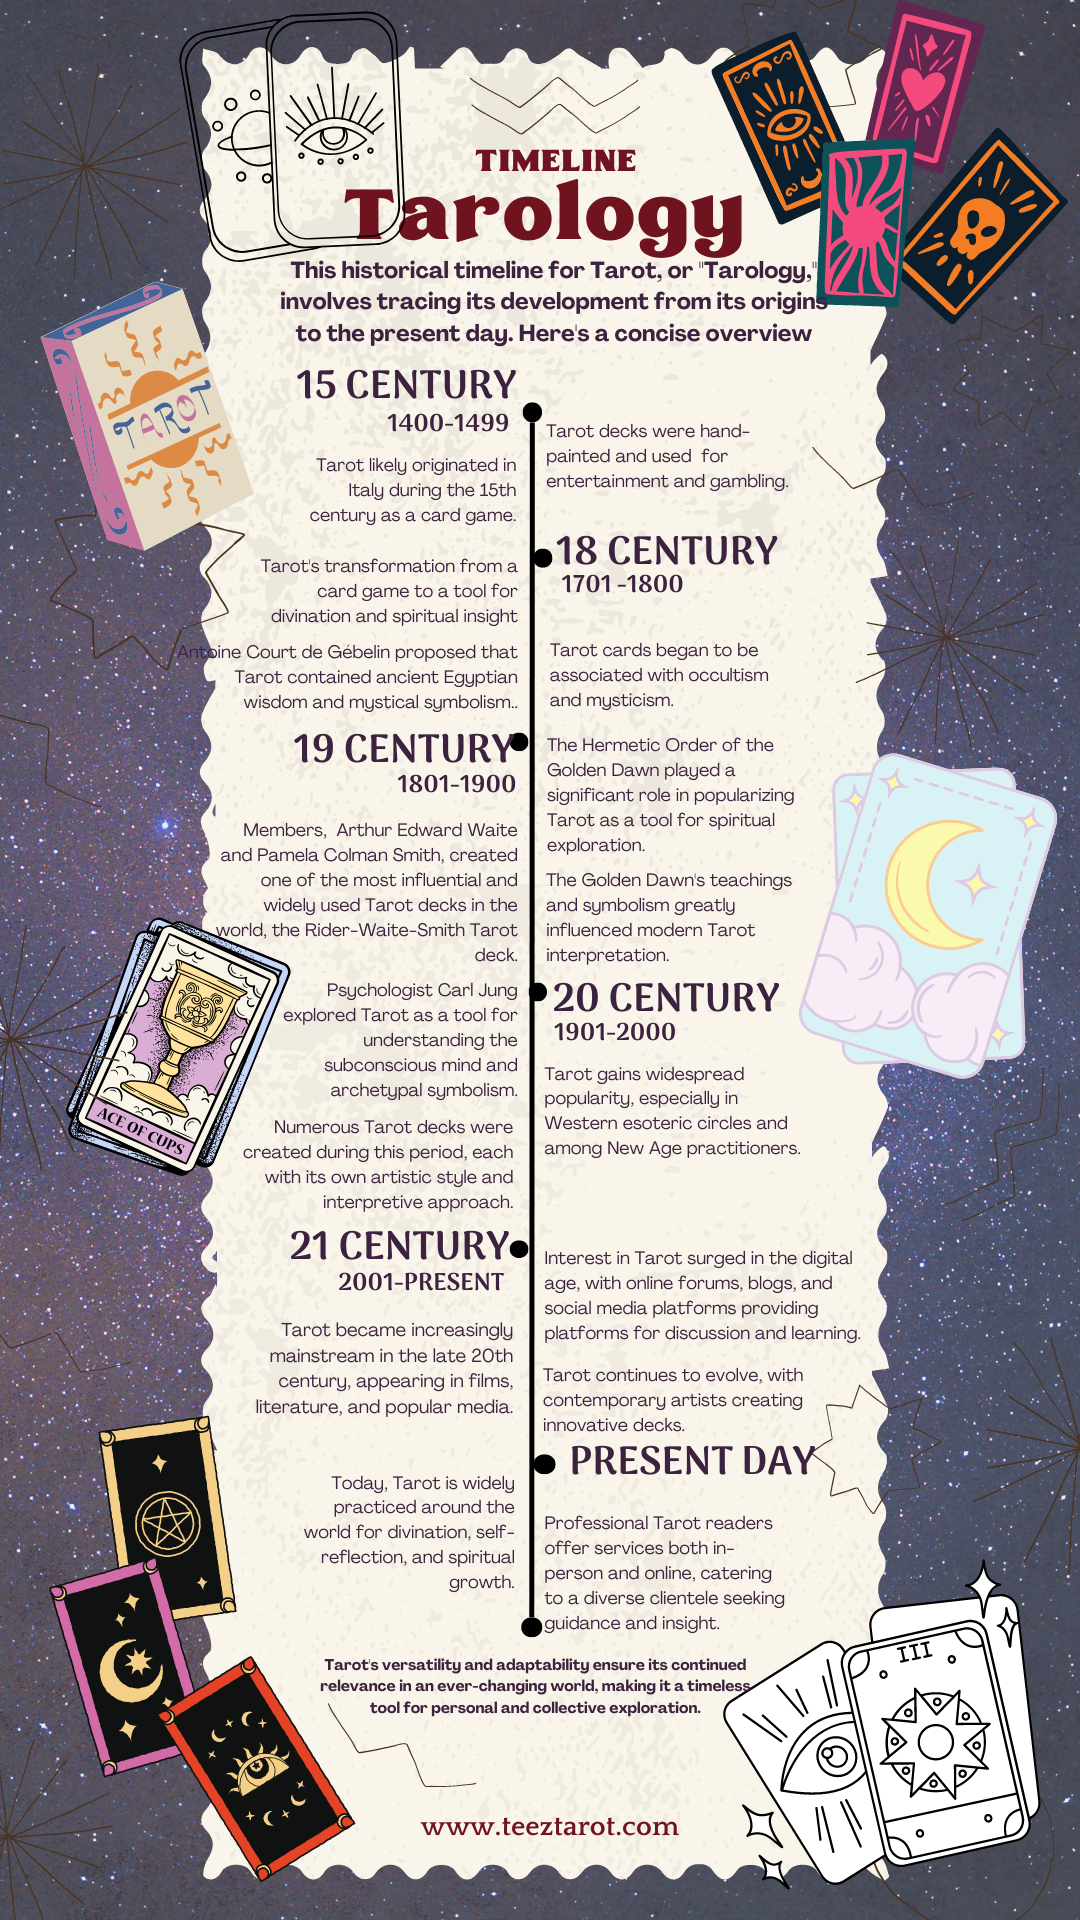 See What The Centuries of Tarot History Looked Like